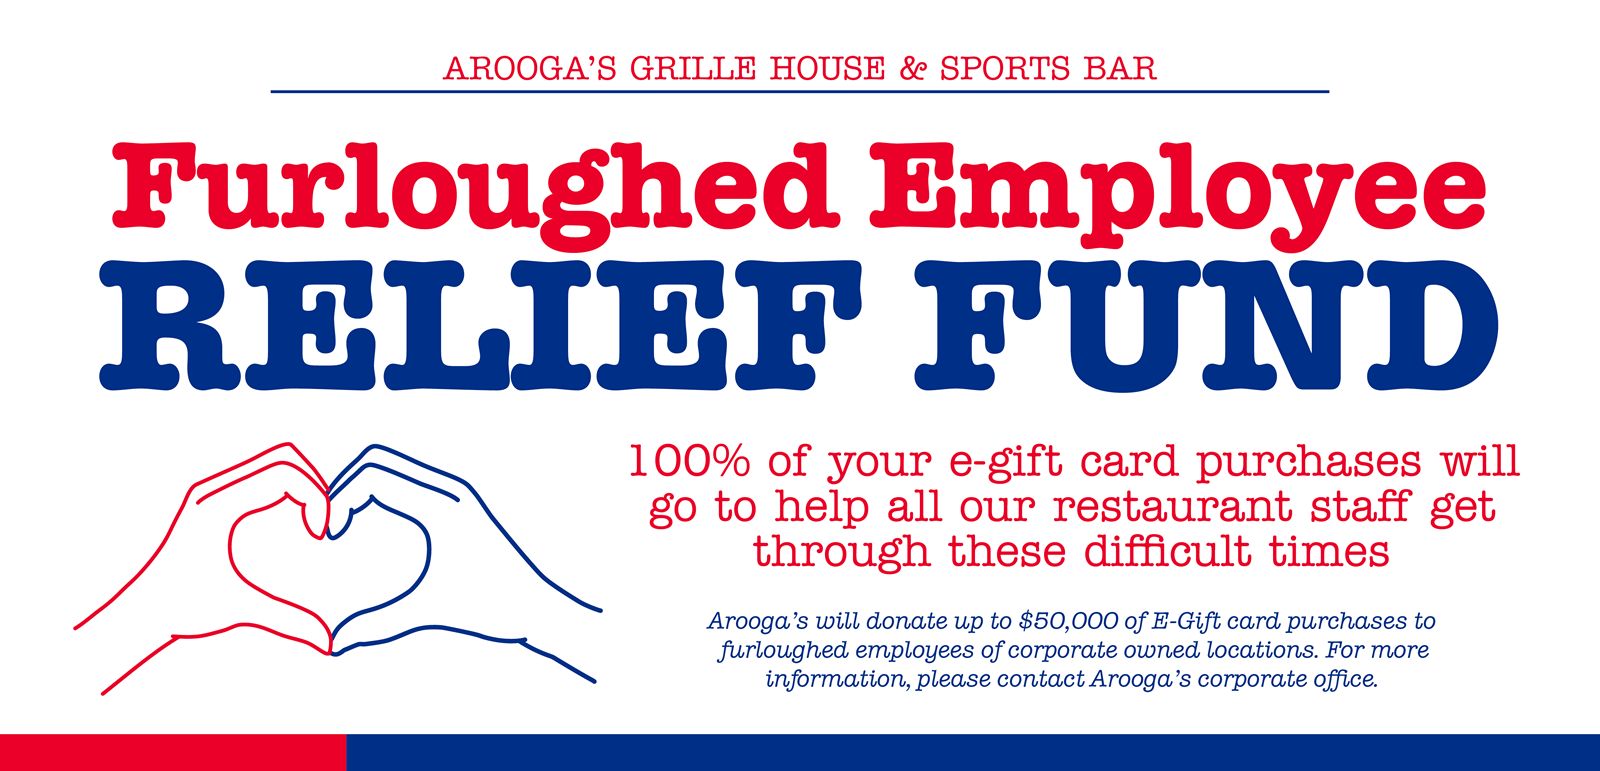 Arooga's Grille House & Sports Bar Will Sell eGift Cards and Donate 100% of Sales Directly to Its Employees